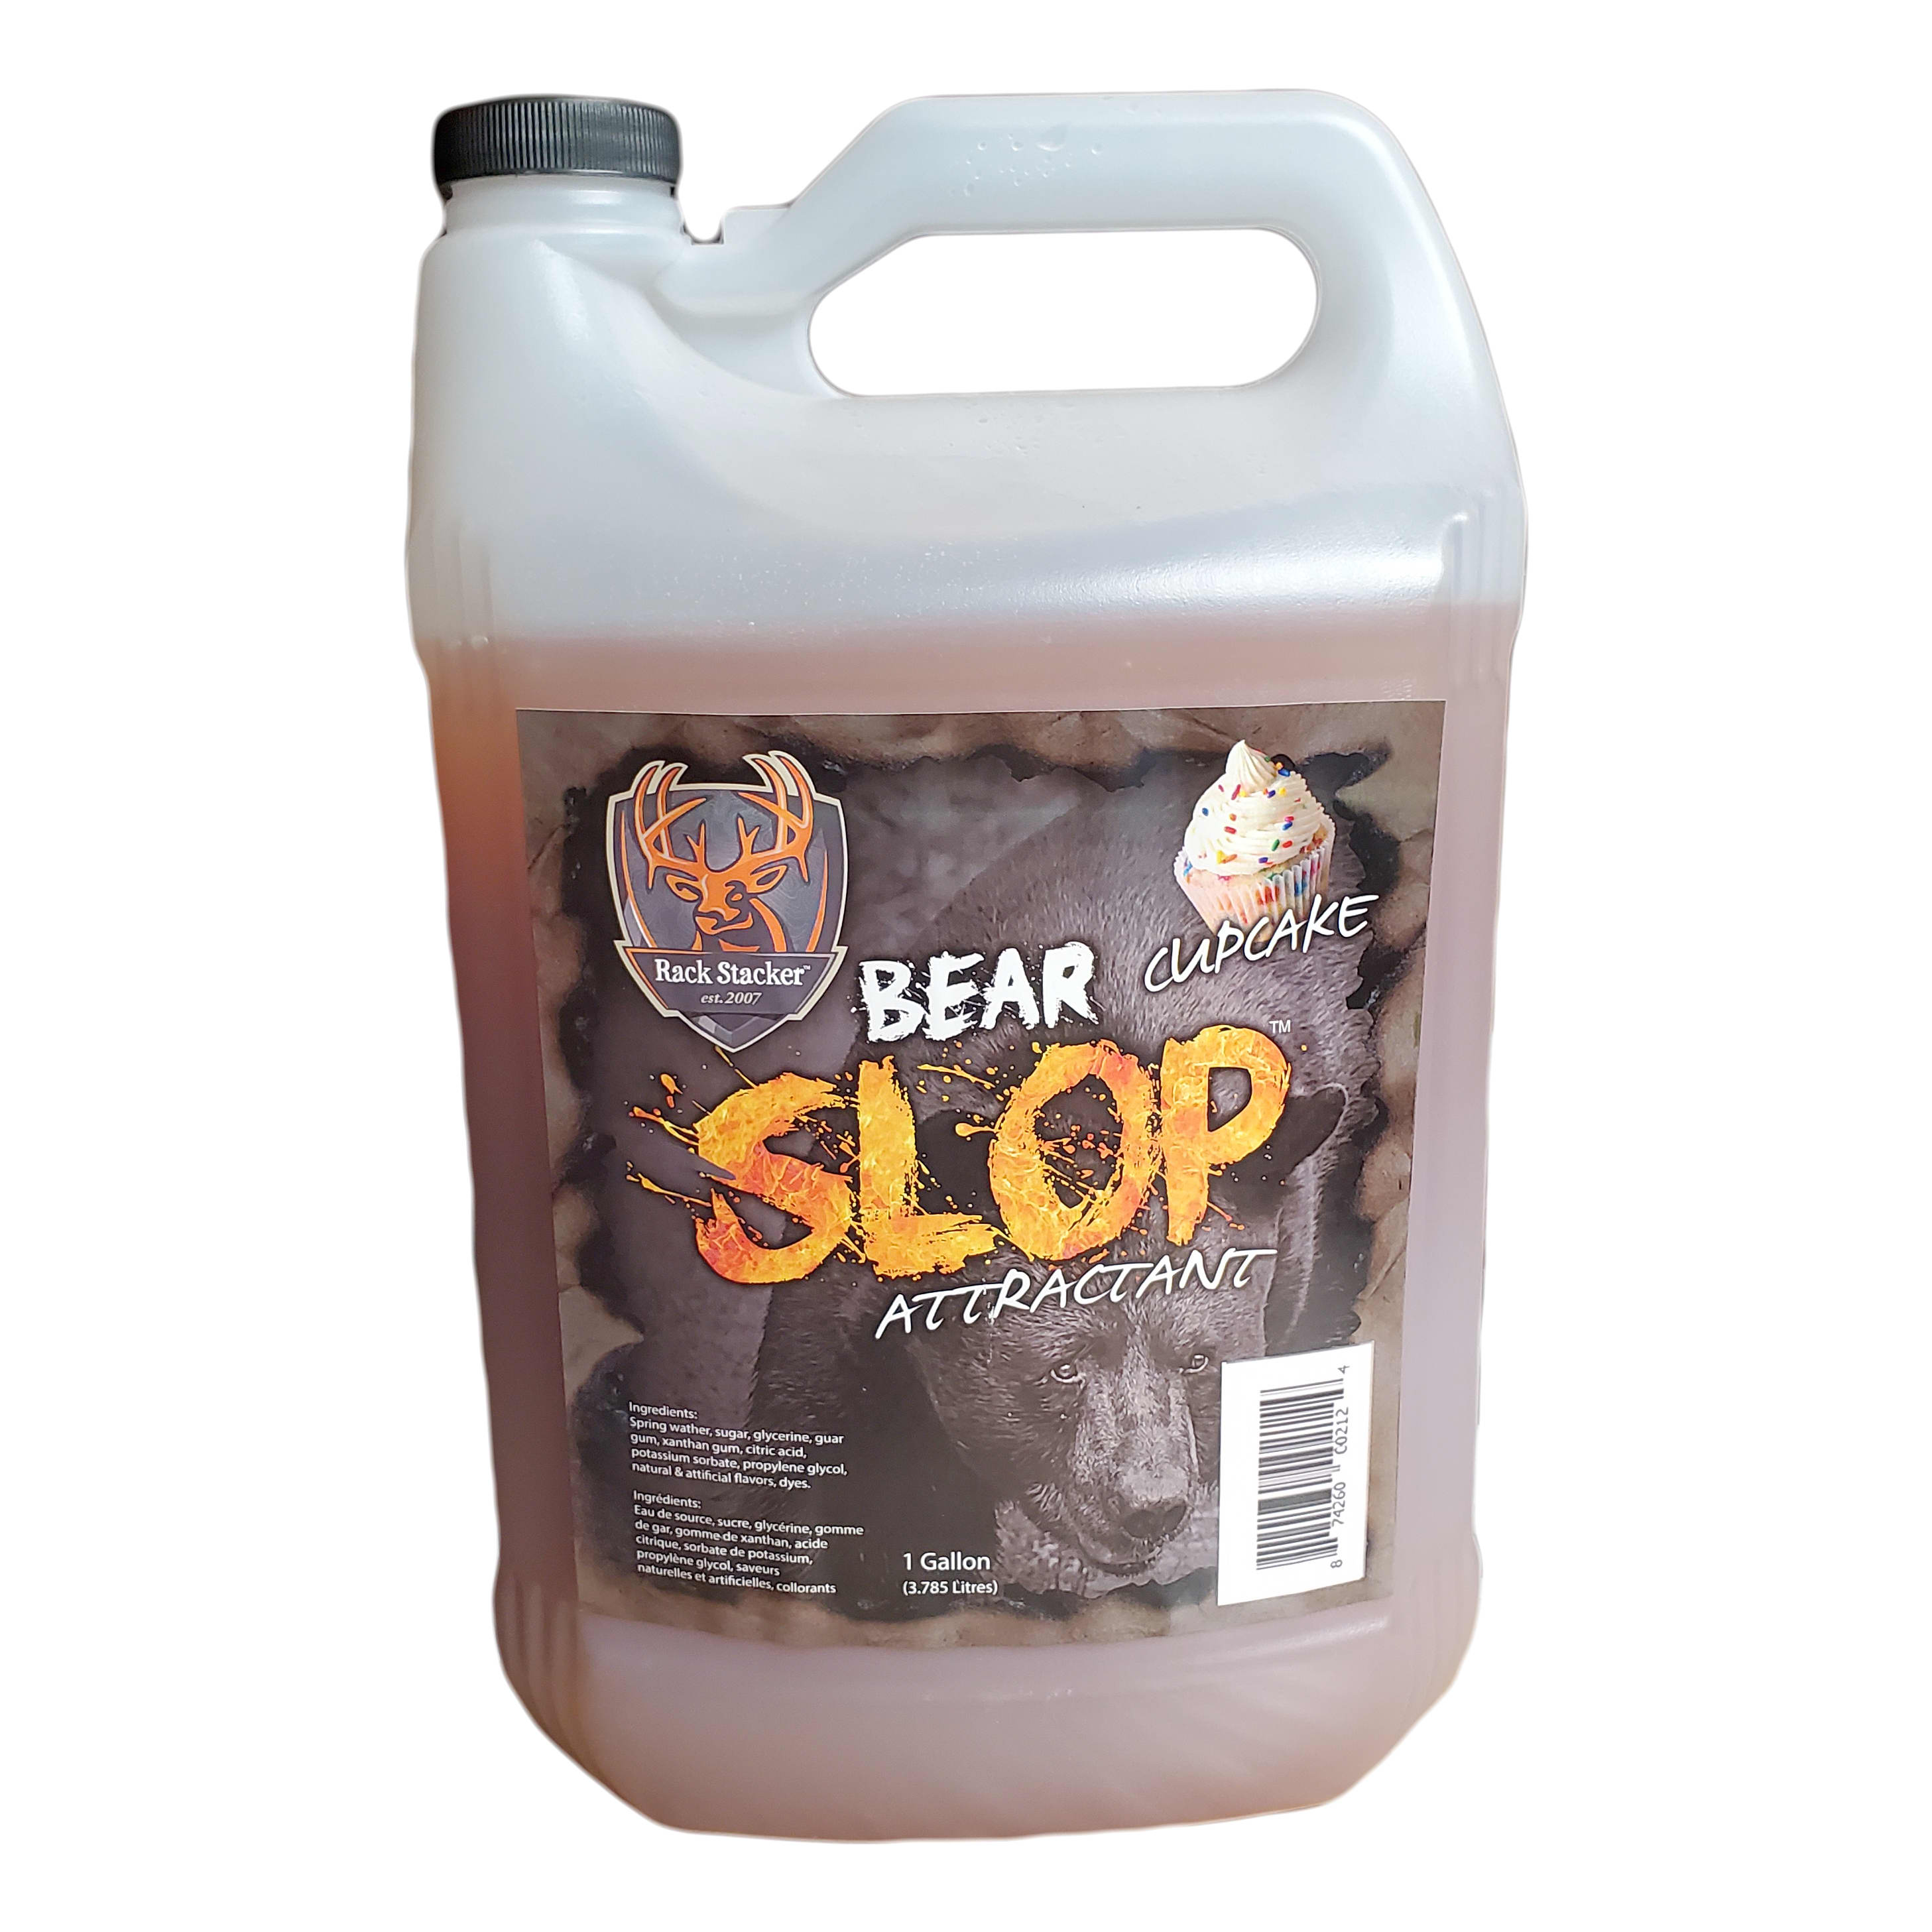 Rack Stacker Cupcake Slop Bear Attractant